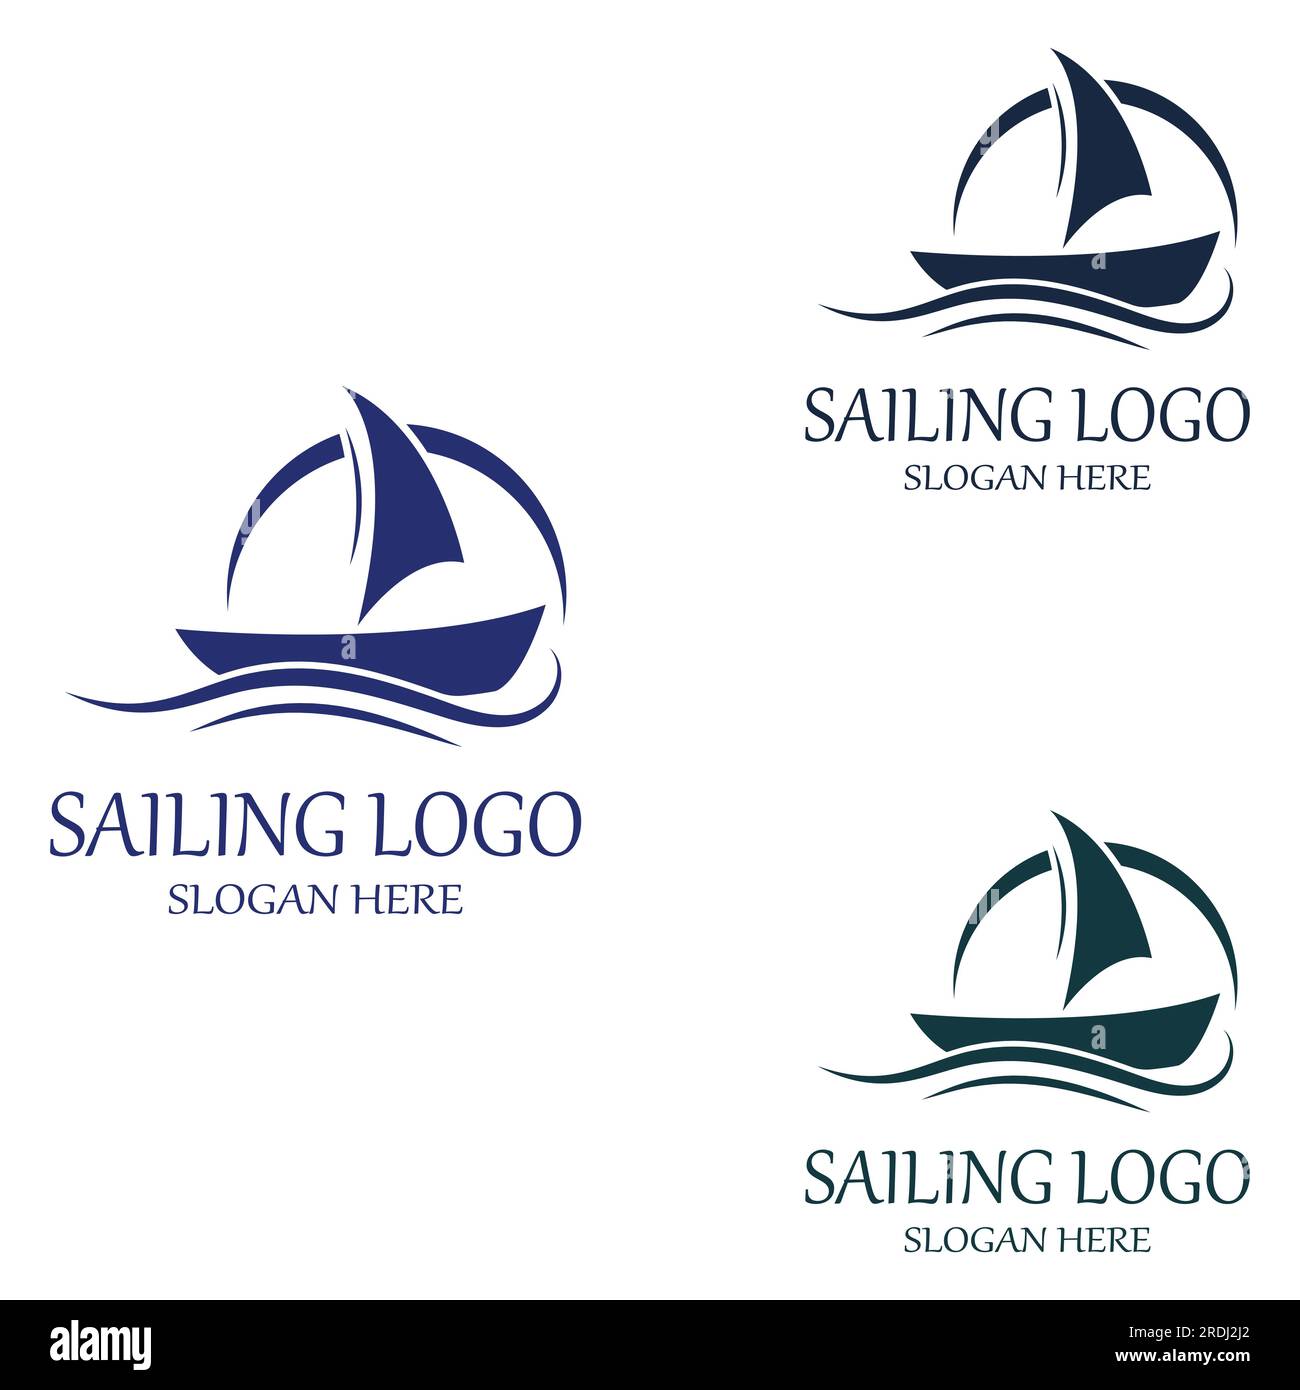 Sailboat or sailing boat logo with waves of waves, By using vector design concept Stock Vector